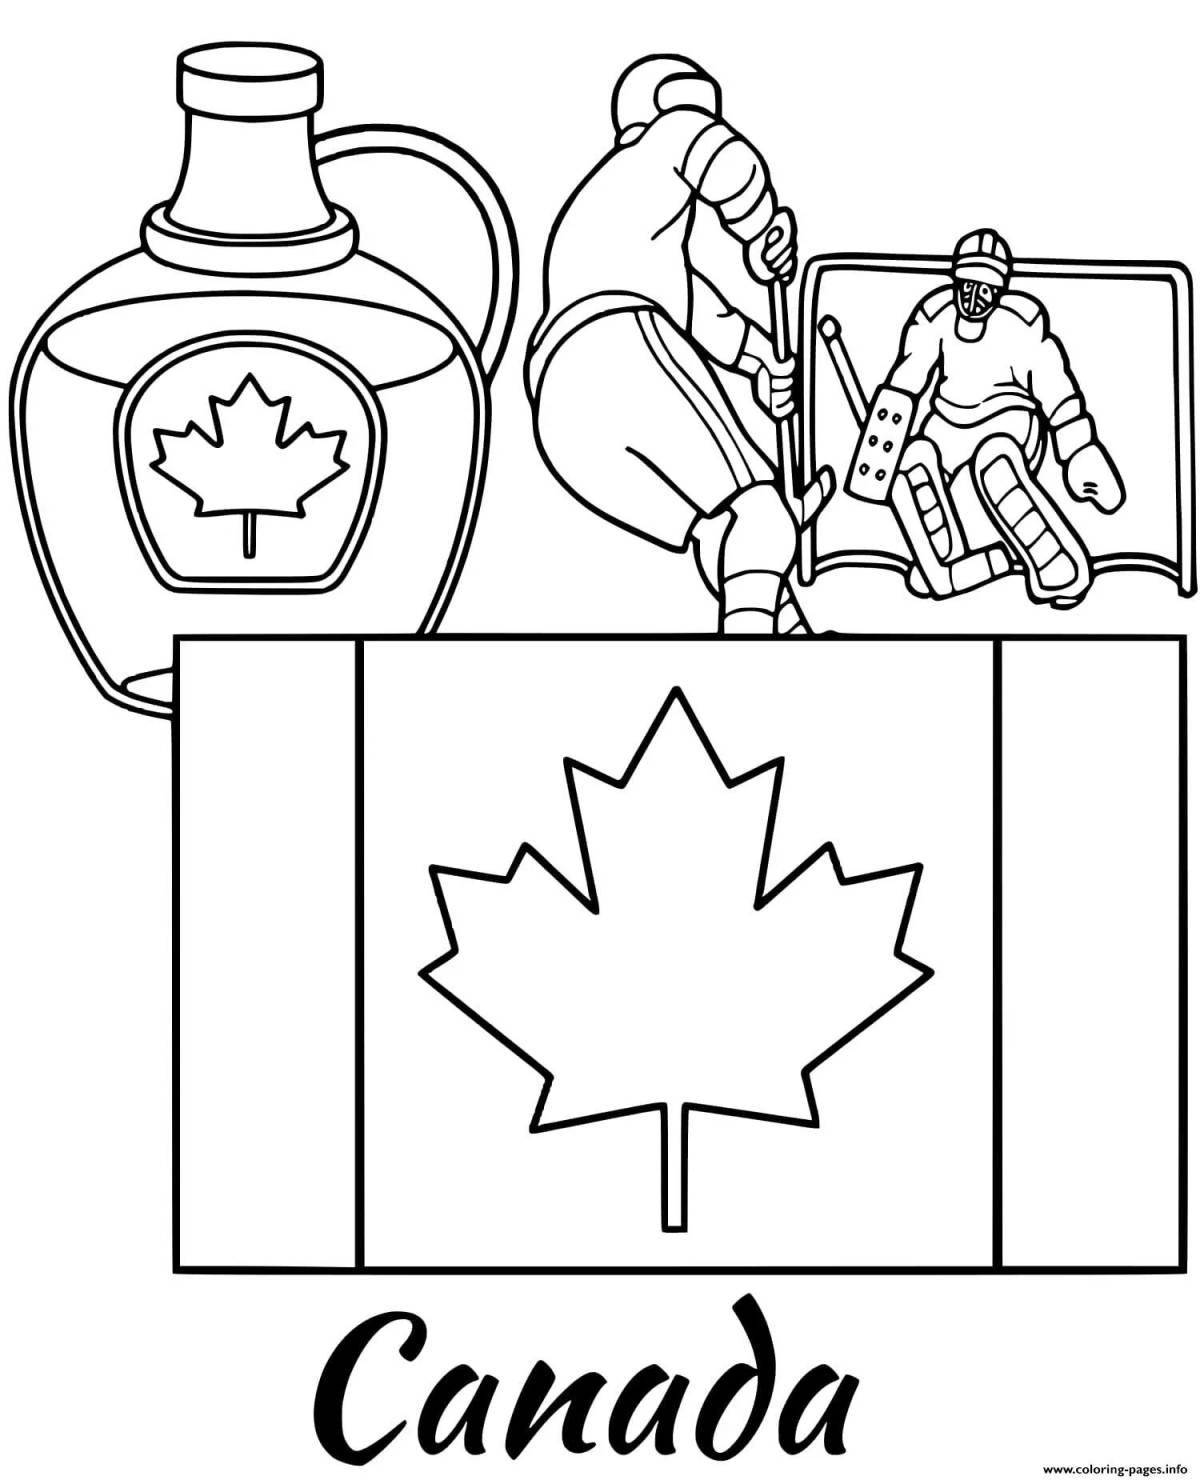 Coloring page gorgeous canada flag